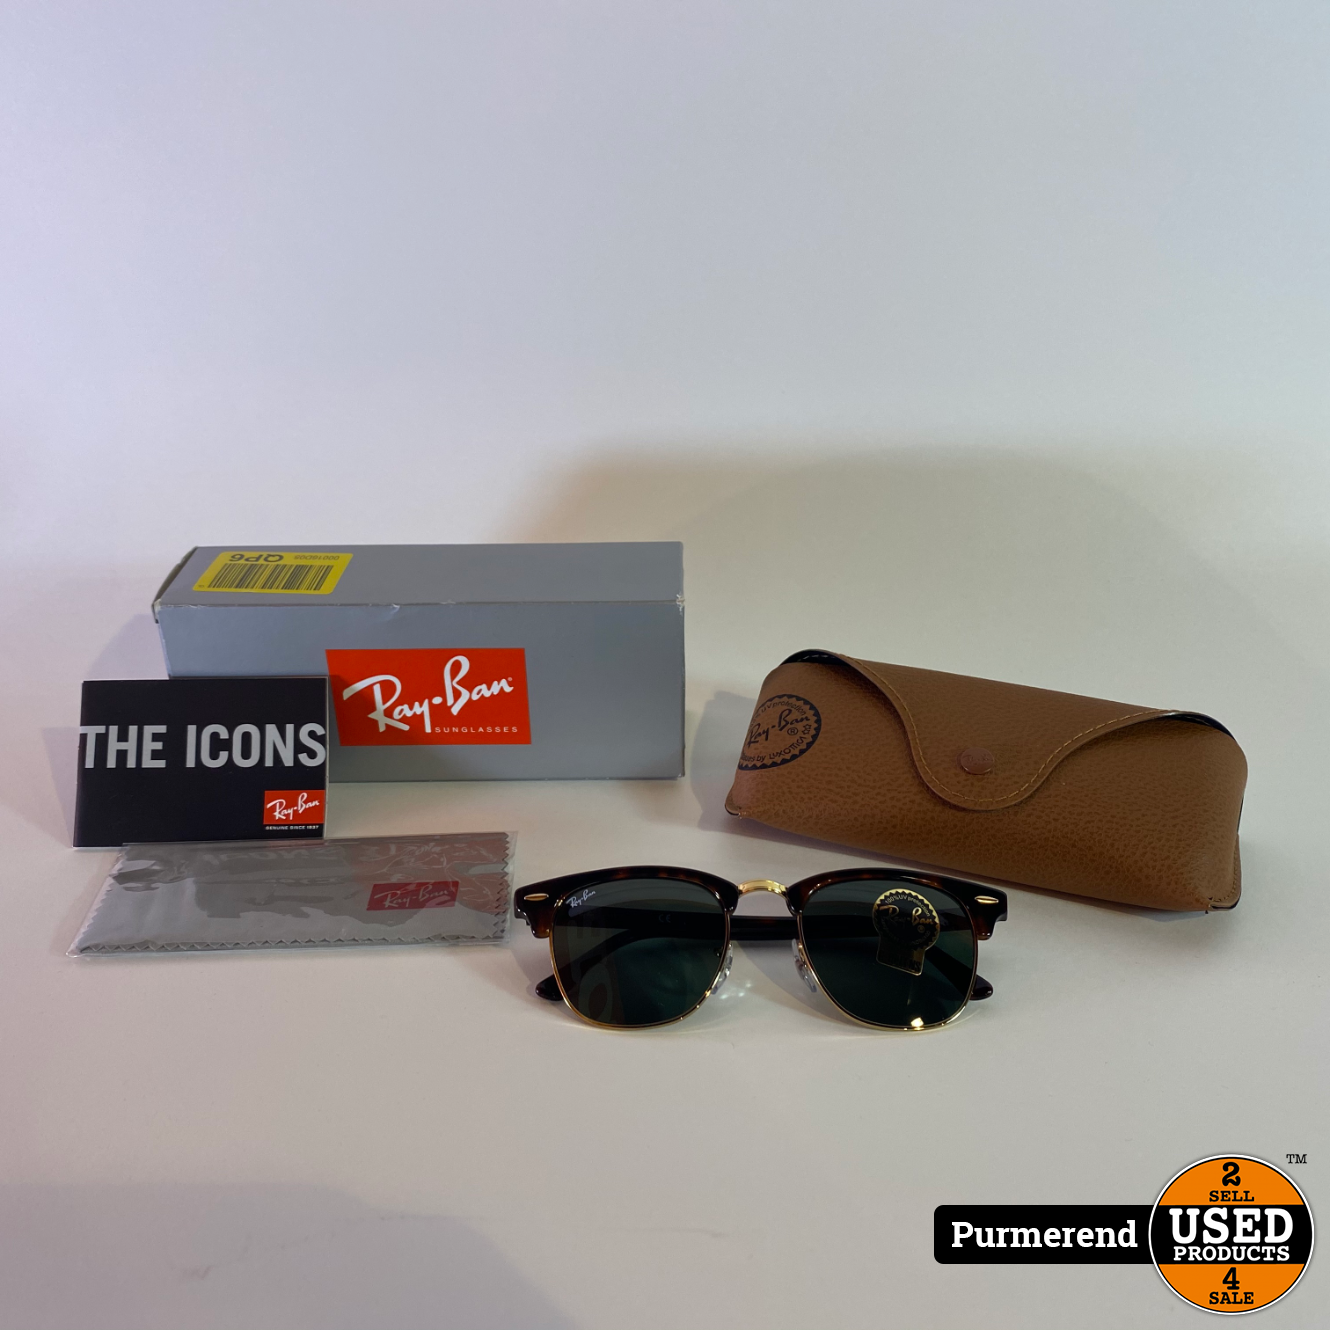 Ray Ban Clubmaster Rb3016 W0366 49 21 Nieuw Compleet Used Products Purmerend